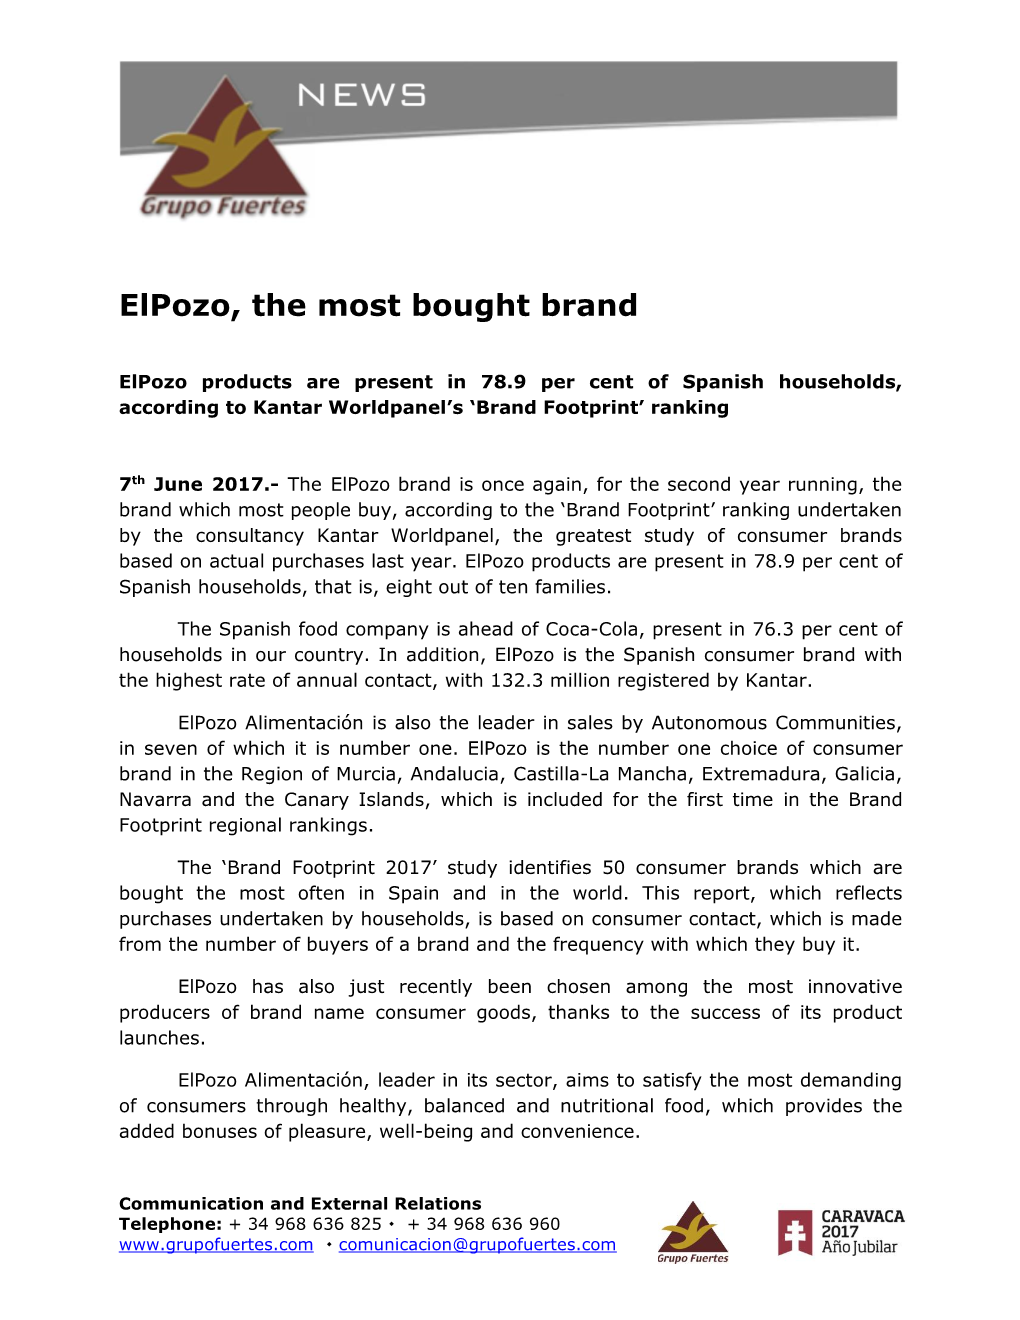 Elpozo, the Most Bought Brand